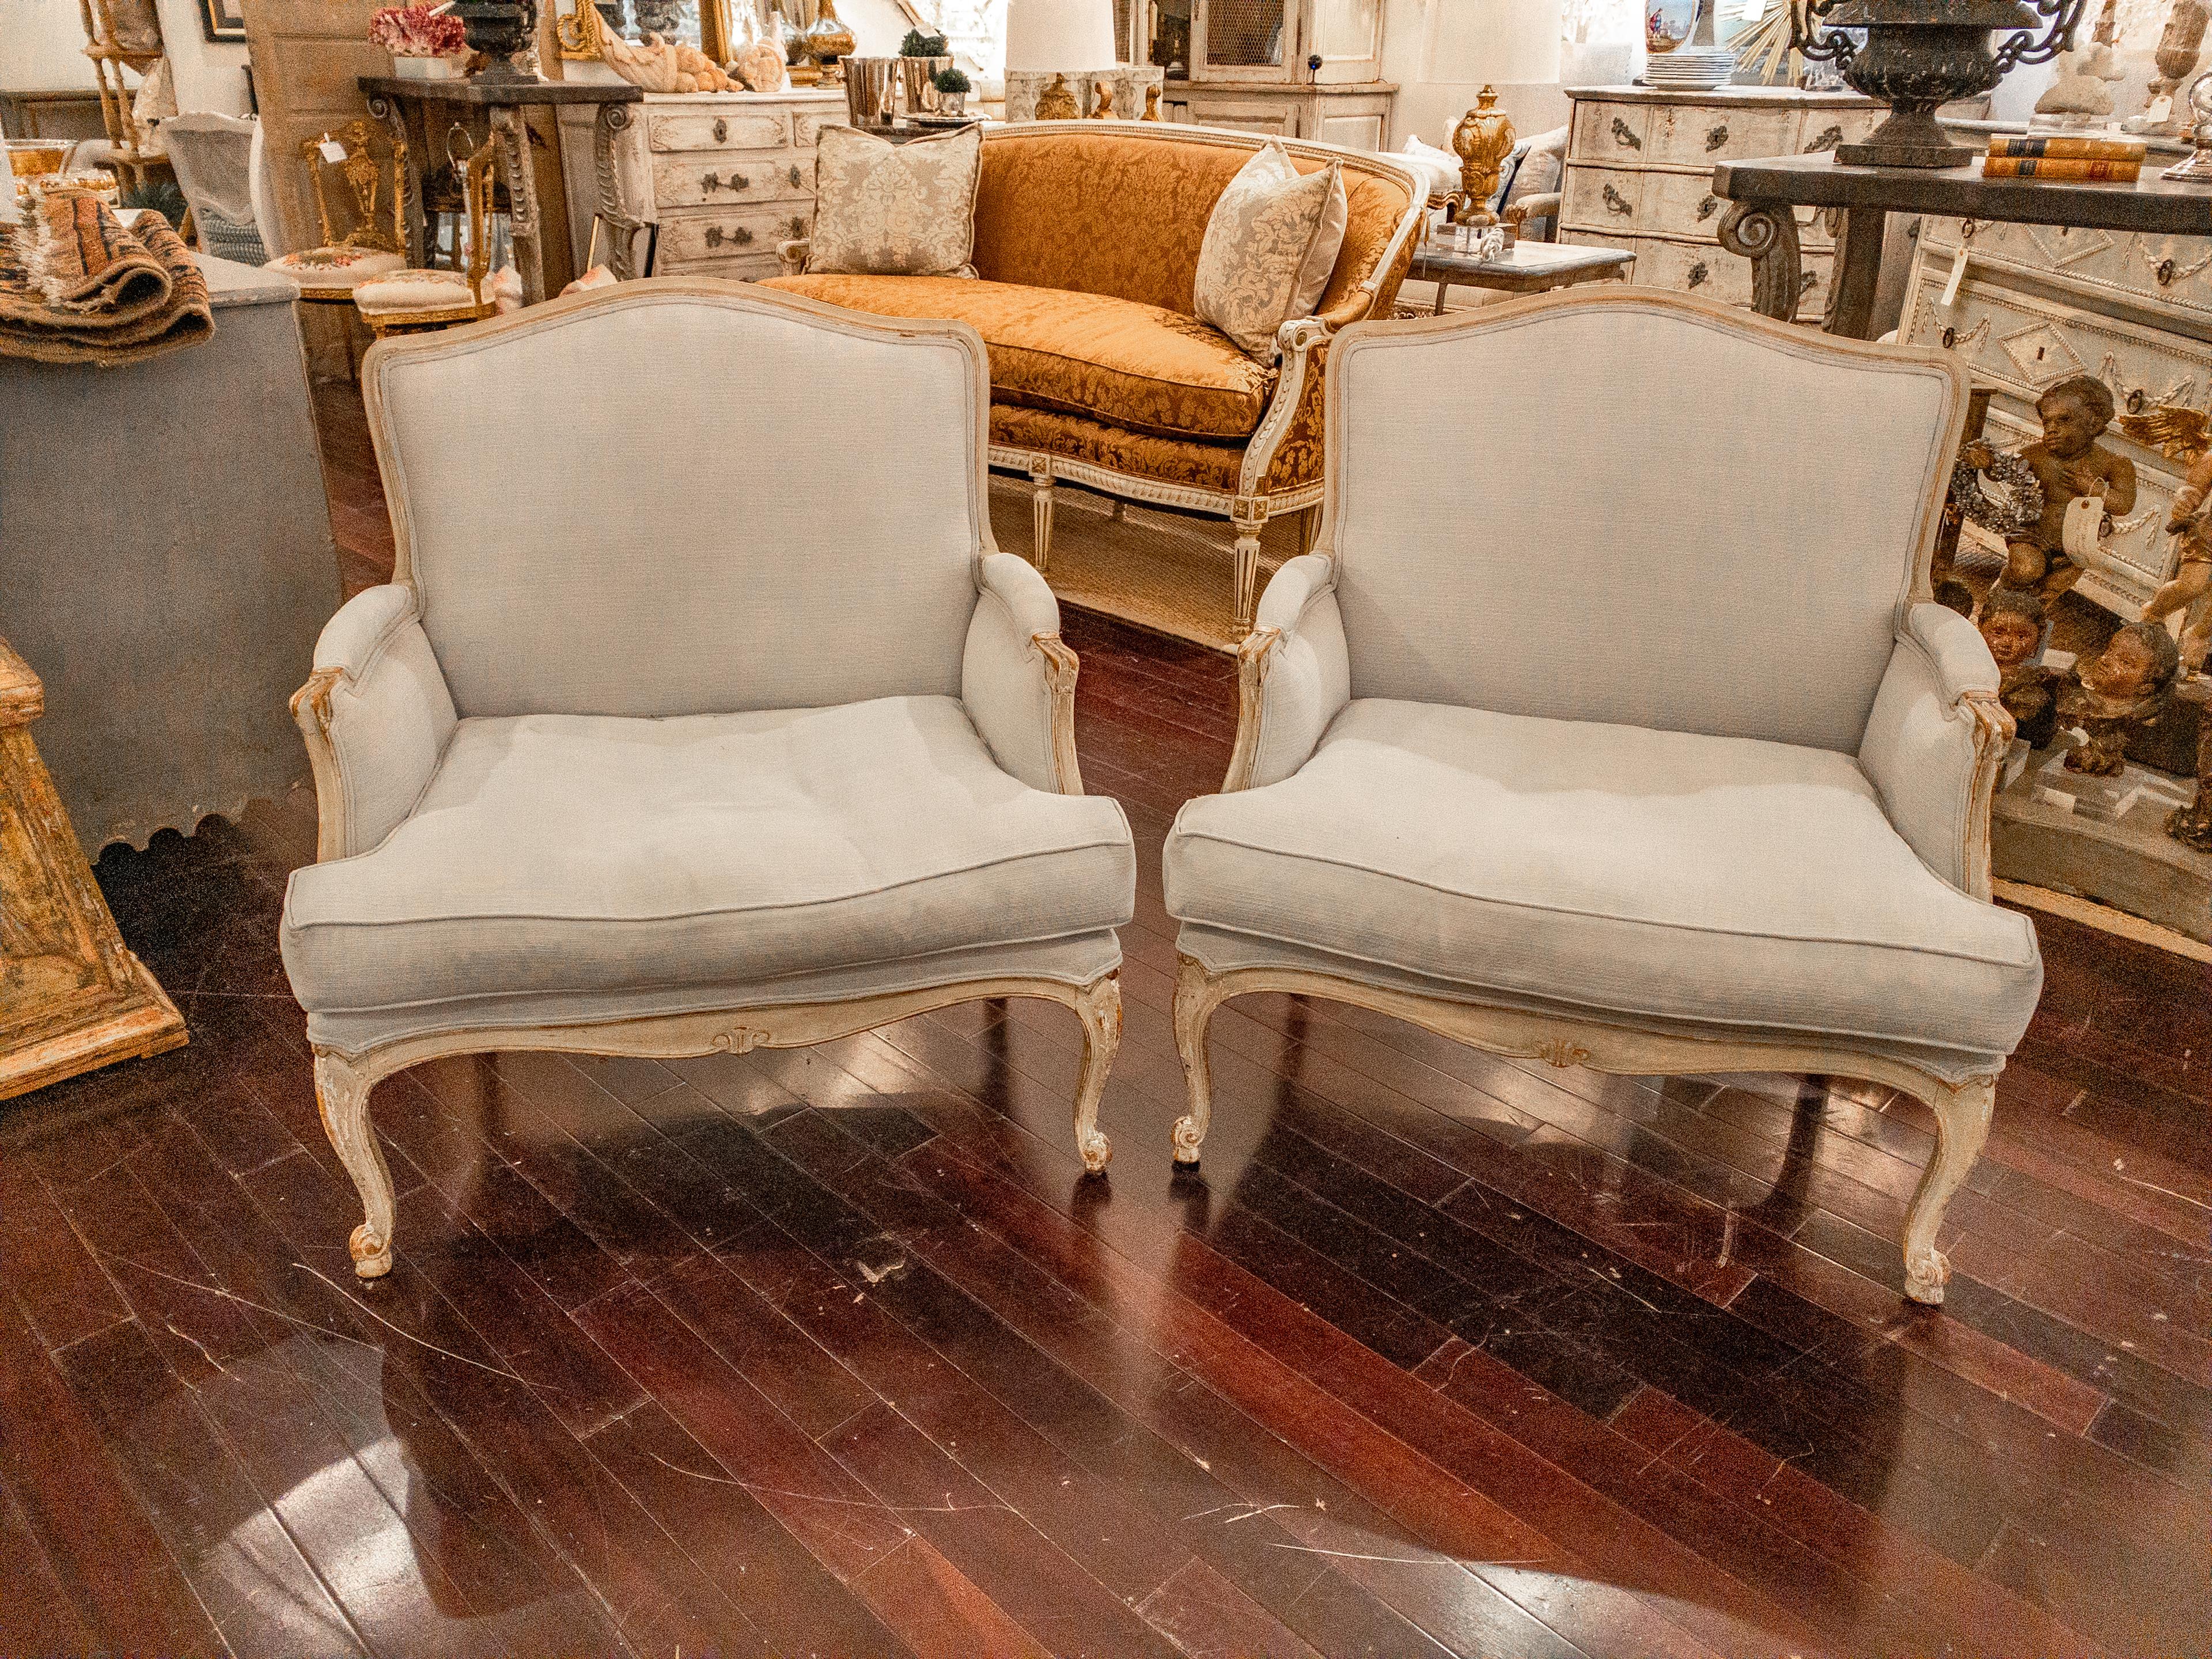 This Pair of French Louis XV Style Upholstered Arm Chairs epitomizes the grace and refinement of the era. Adorned in a newly upholstered grayish sky blue fabric, they exude a sense of tranquility and sophistication, perfectly complementing any